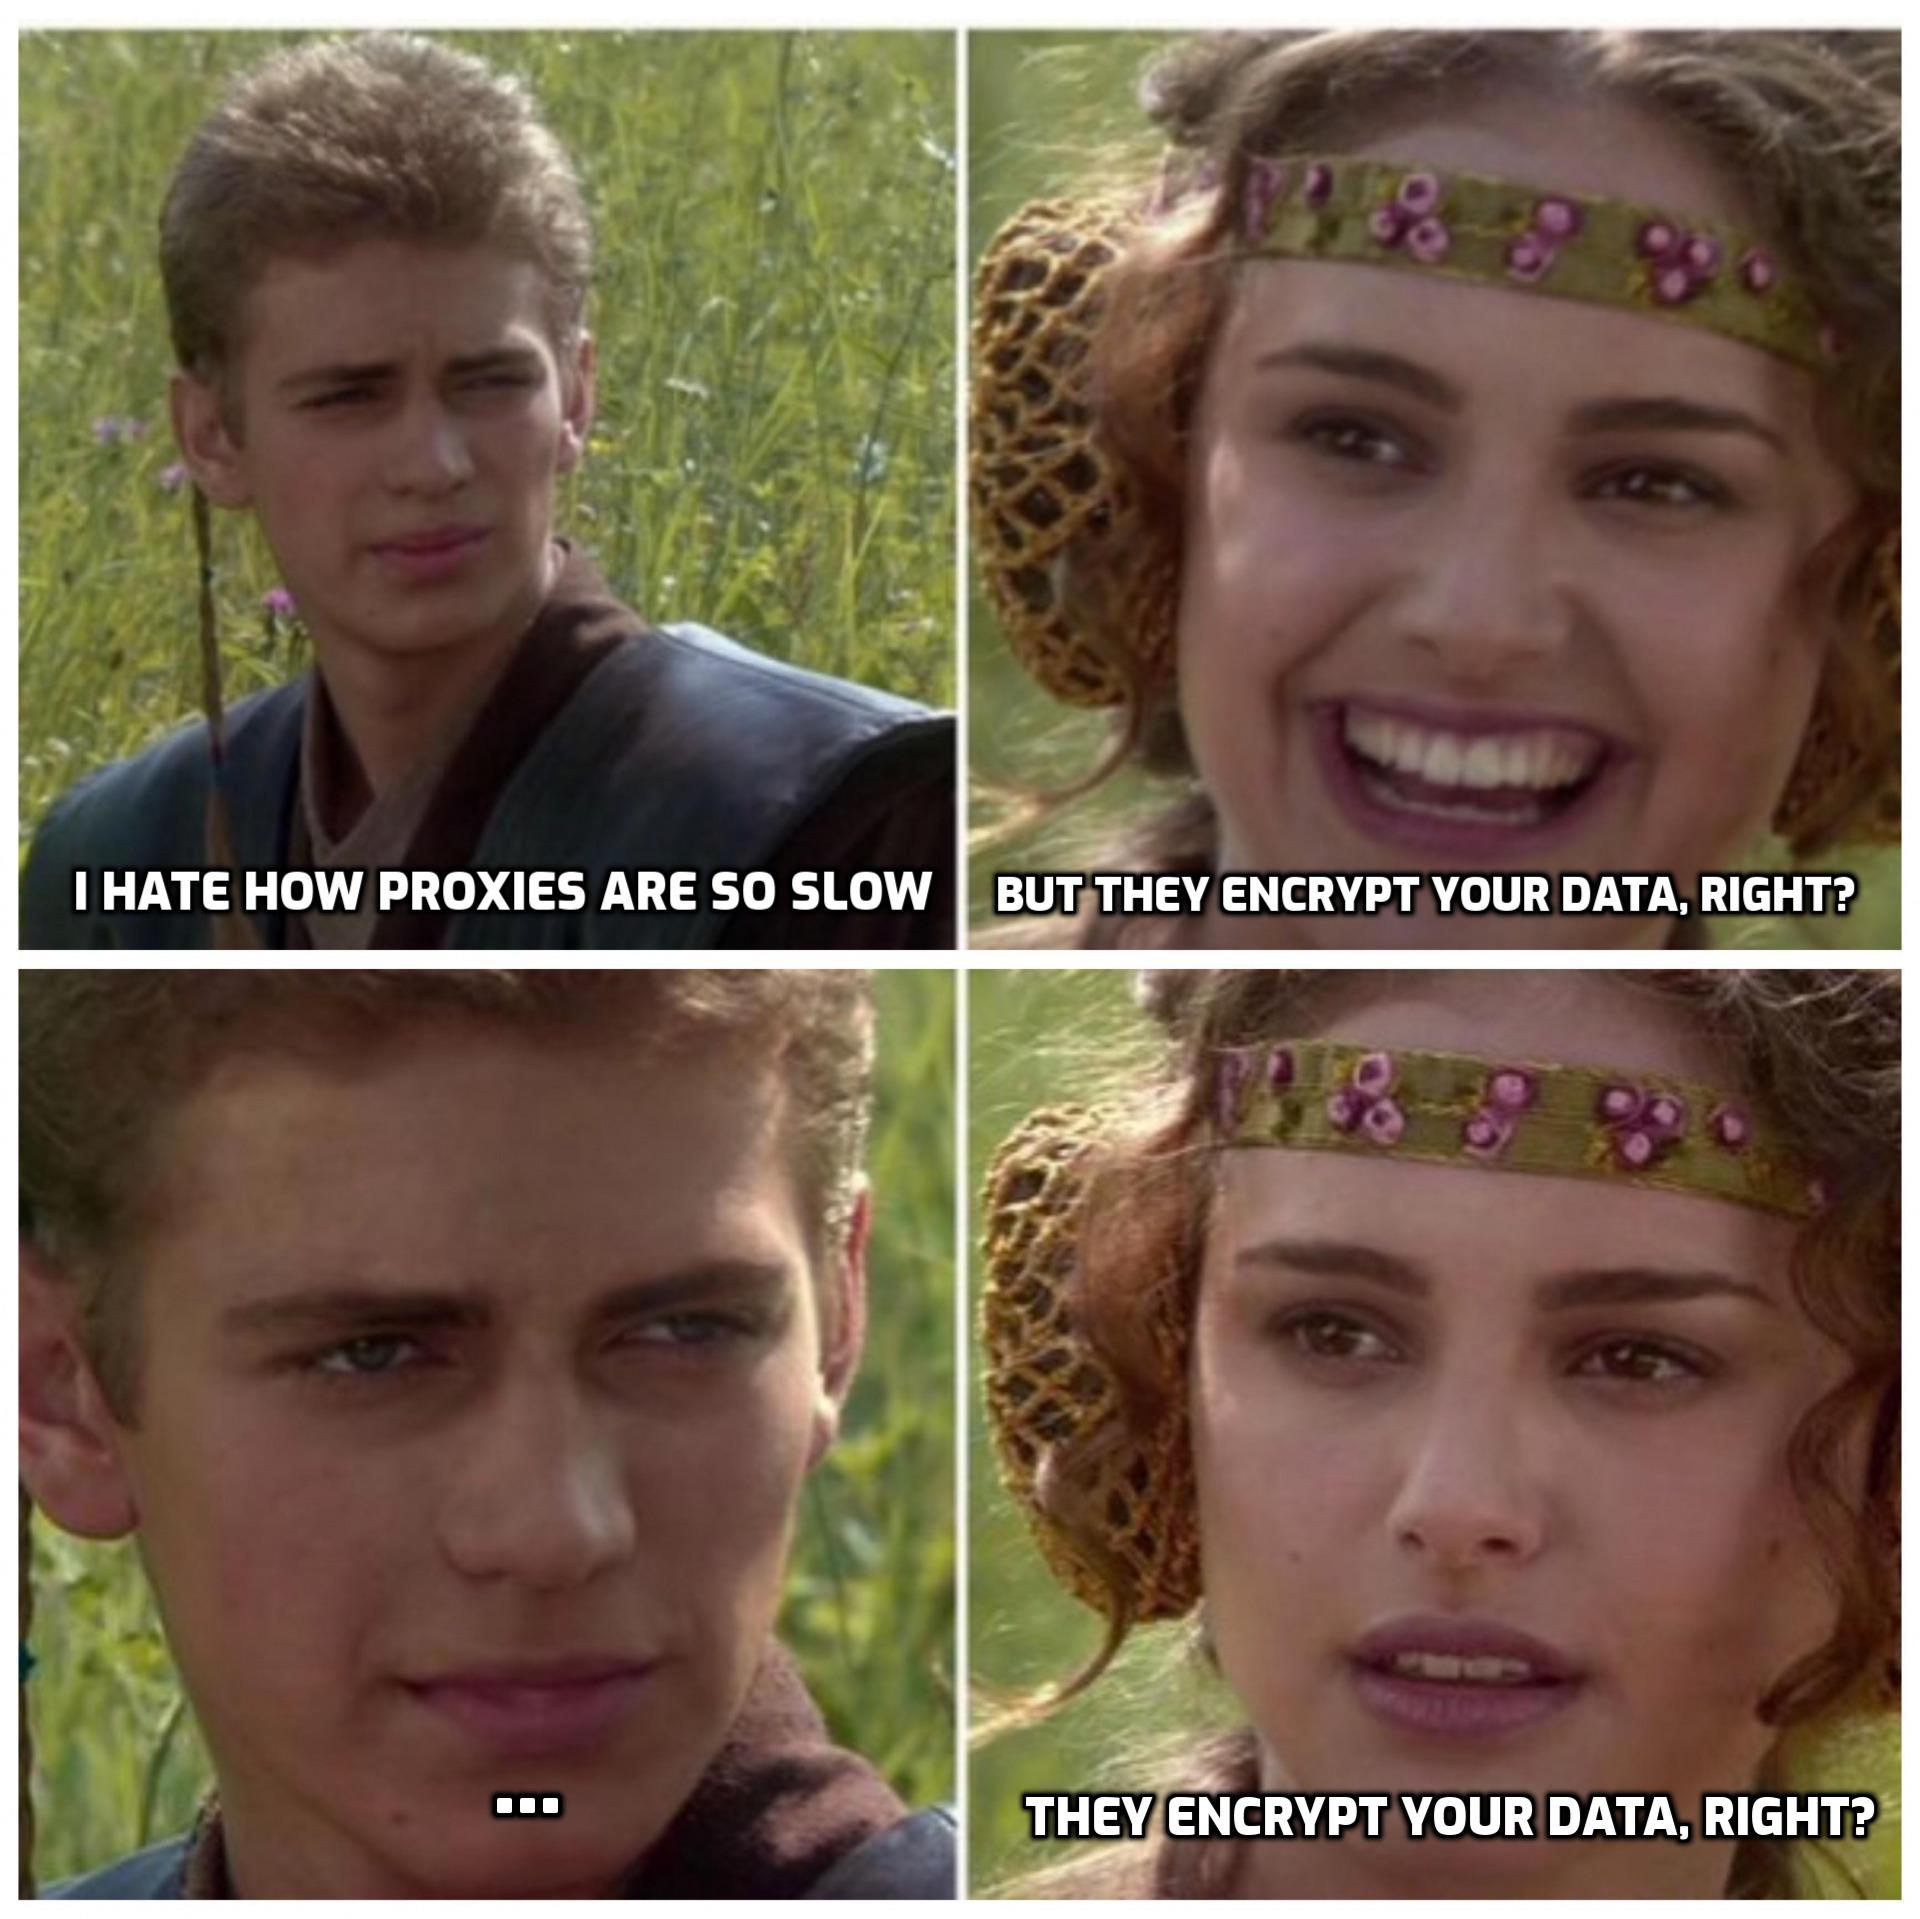 Padme and Anakin discussing proxies in meme format. caption: Does Padmé know proxies pass your data in plain text? 